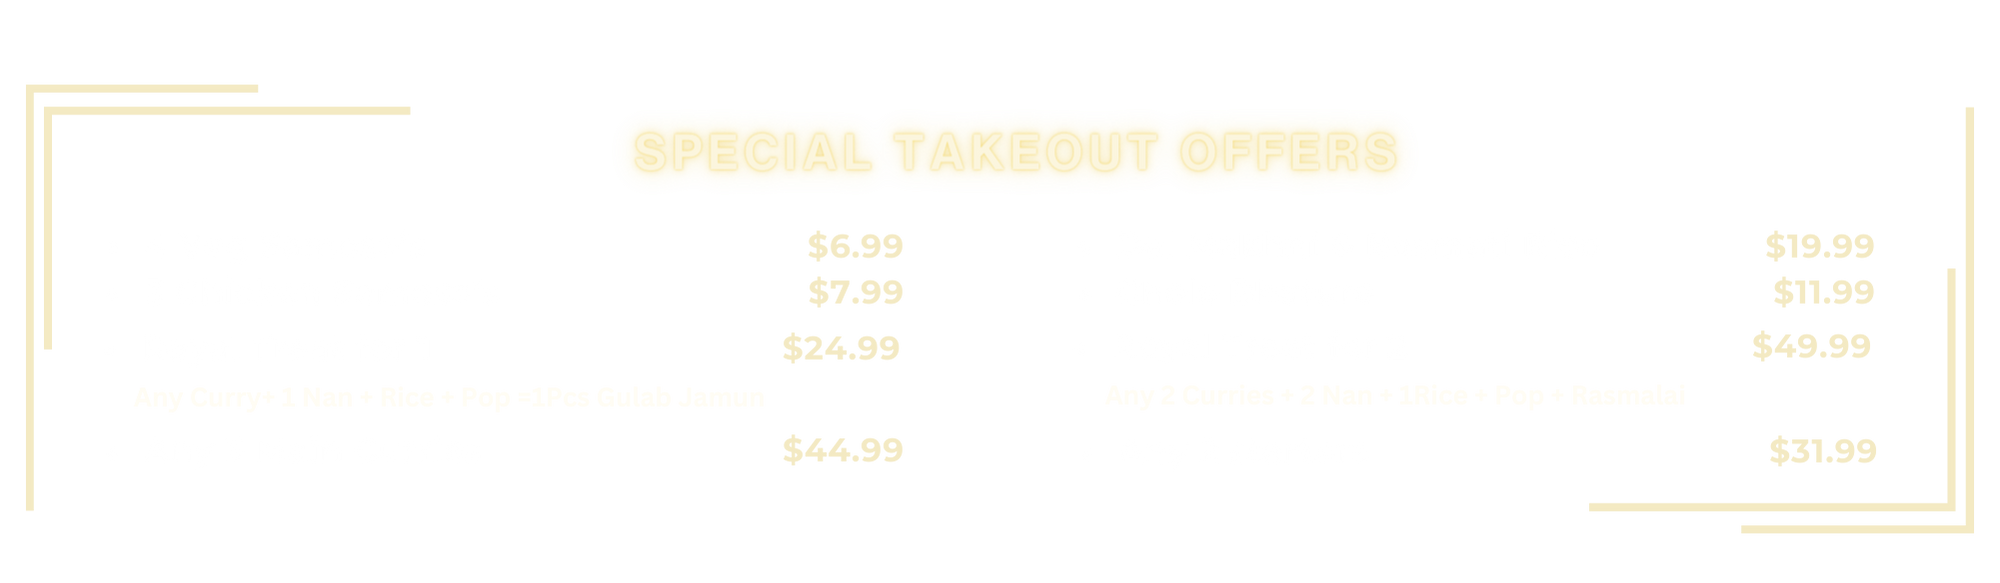 Takeout Special offer